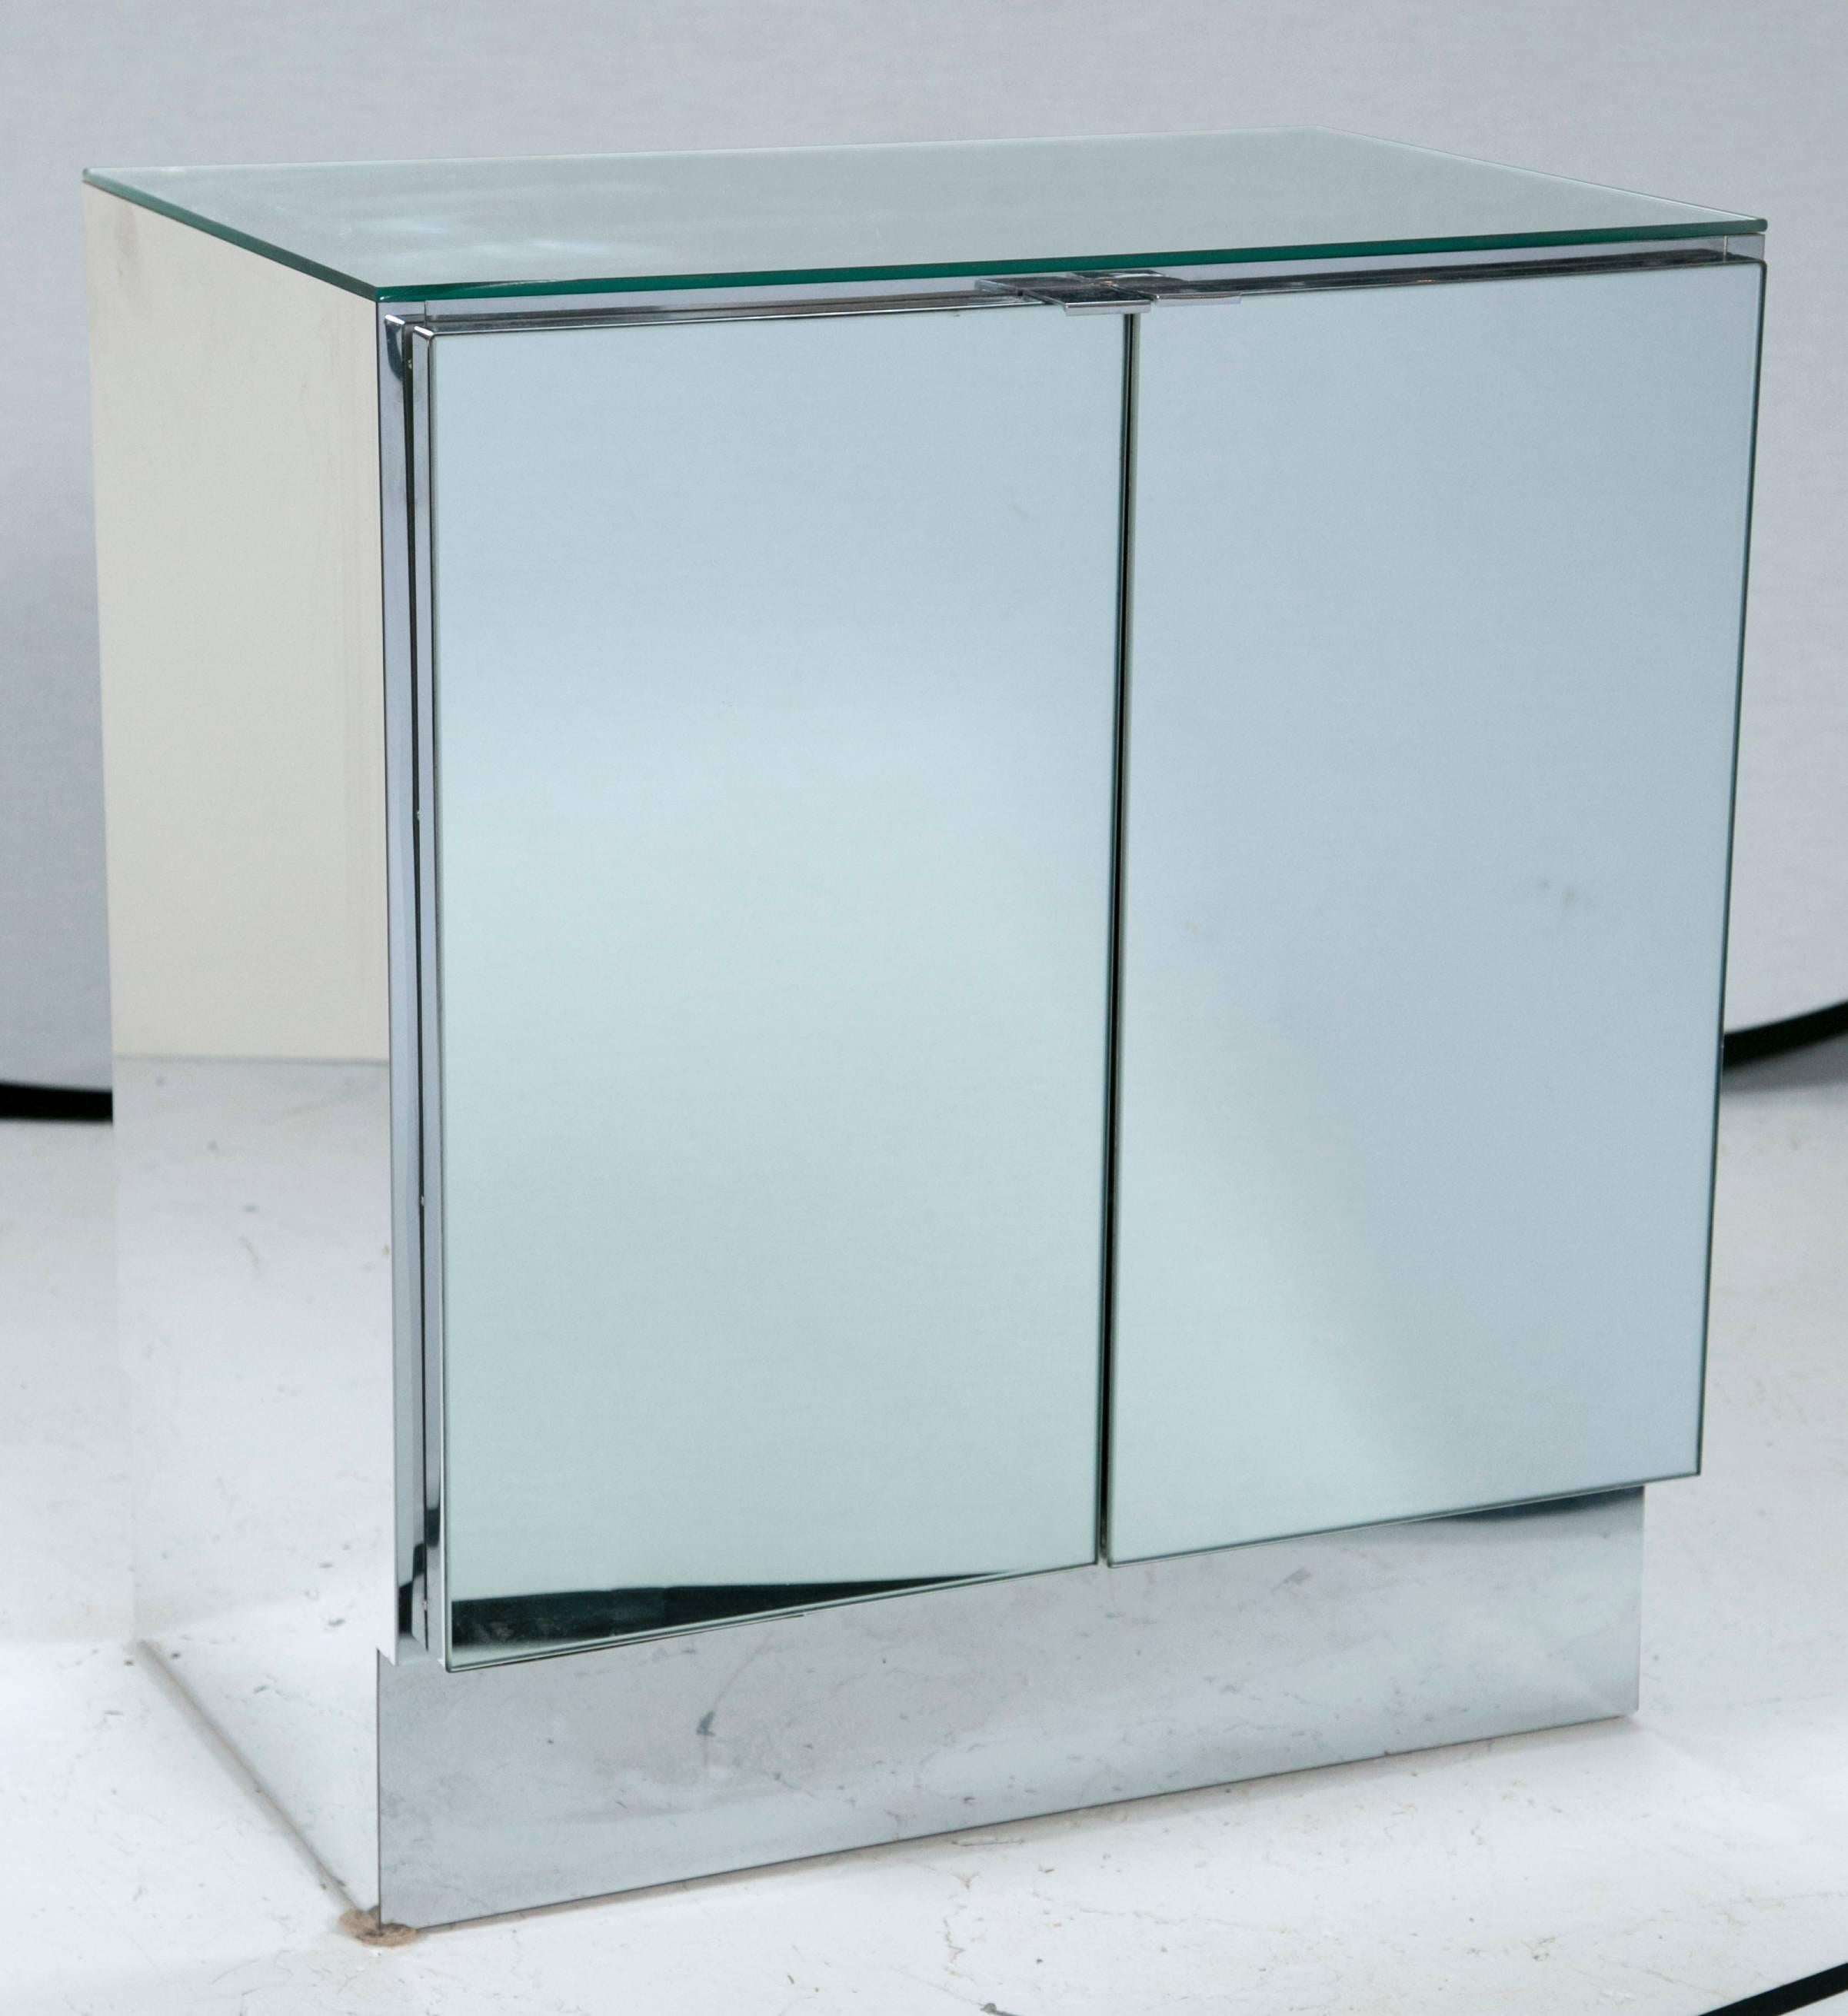 The ultimate statement pieces. Stunning minimally designed mirrored night stands by Ello Furniture. Includes a surface top built in lighting unit. Perfect for maintaining a simple look while incorporating accent light.